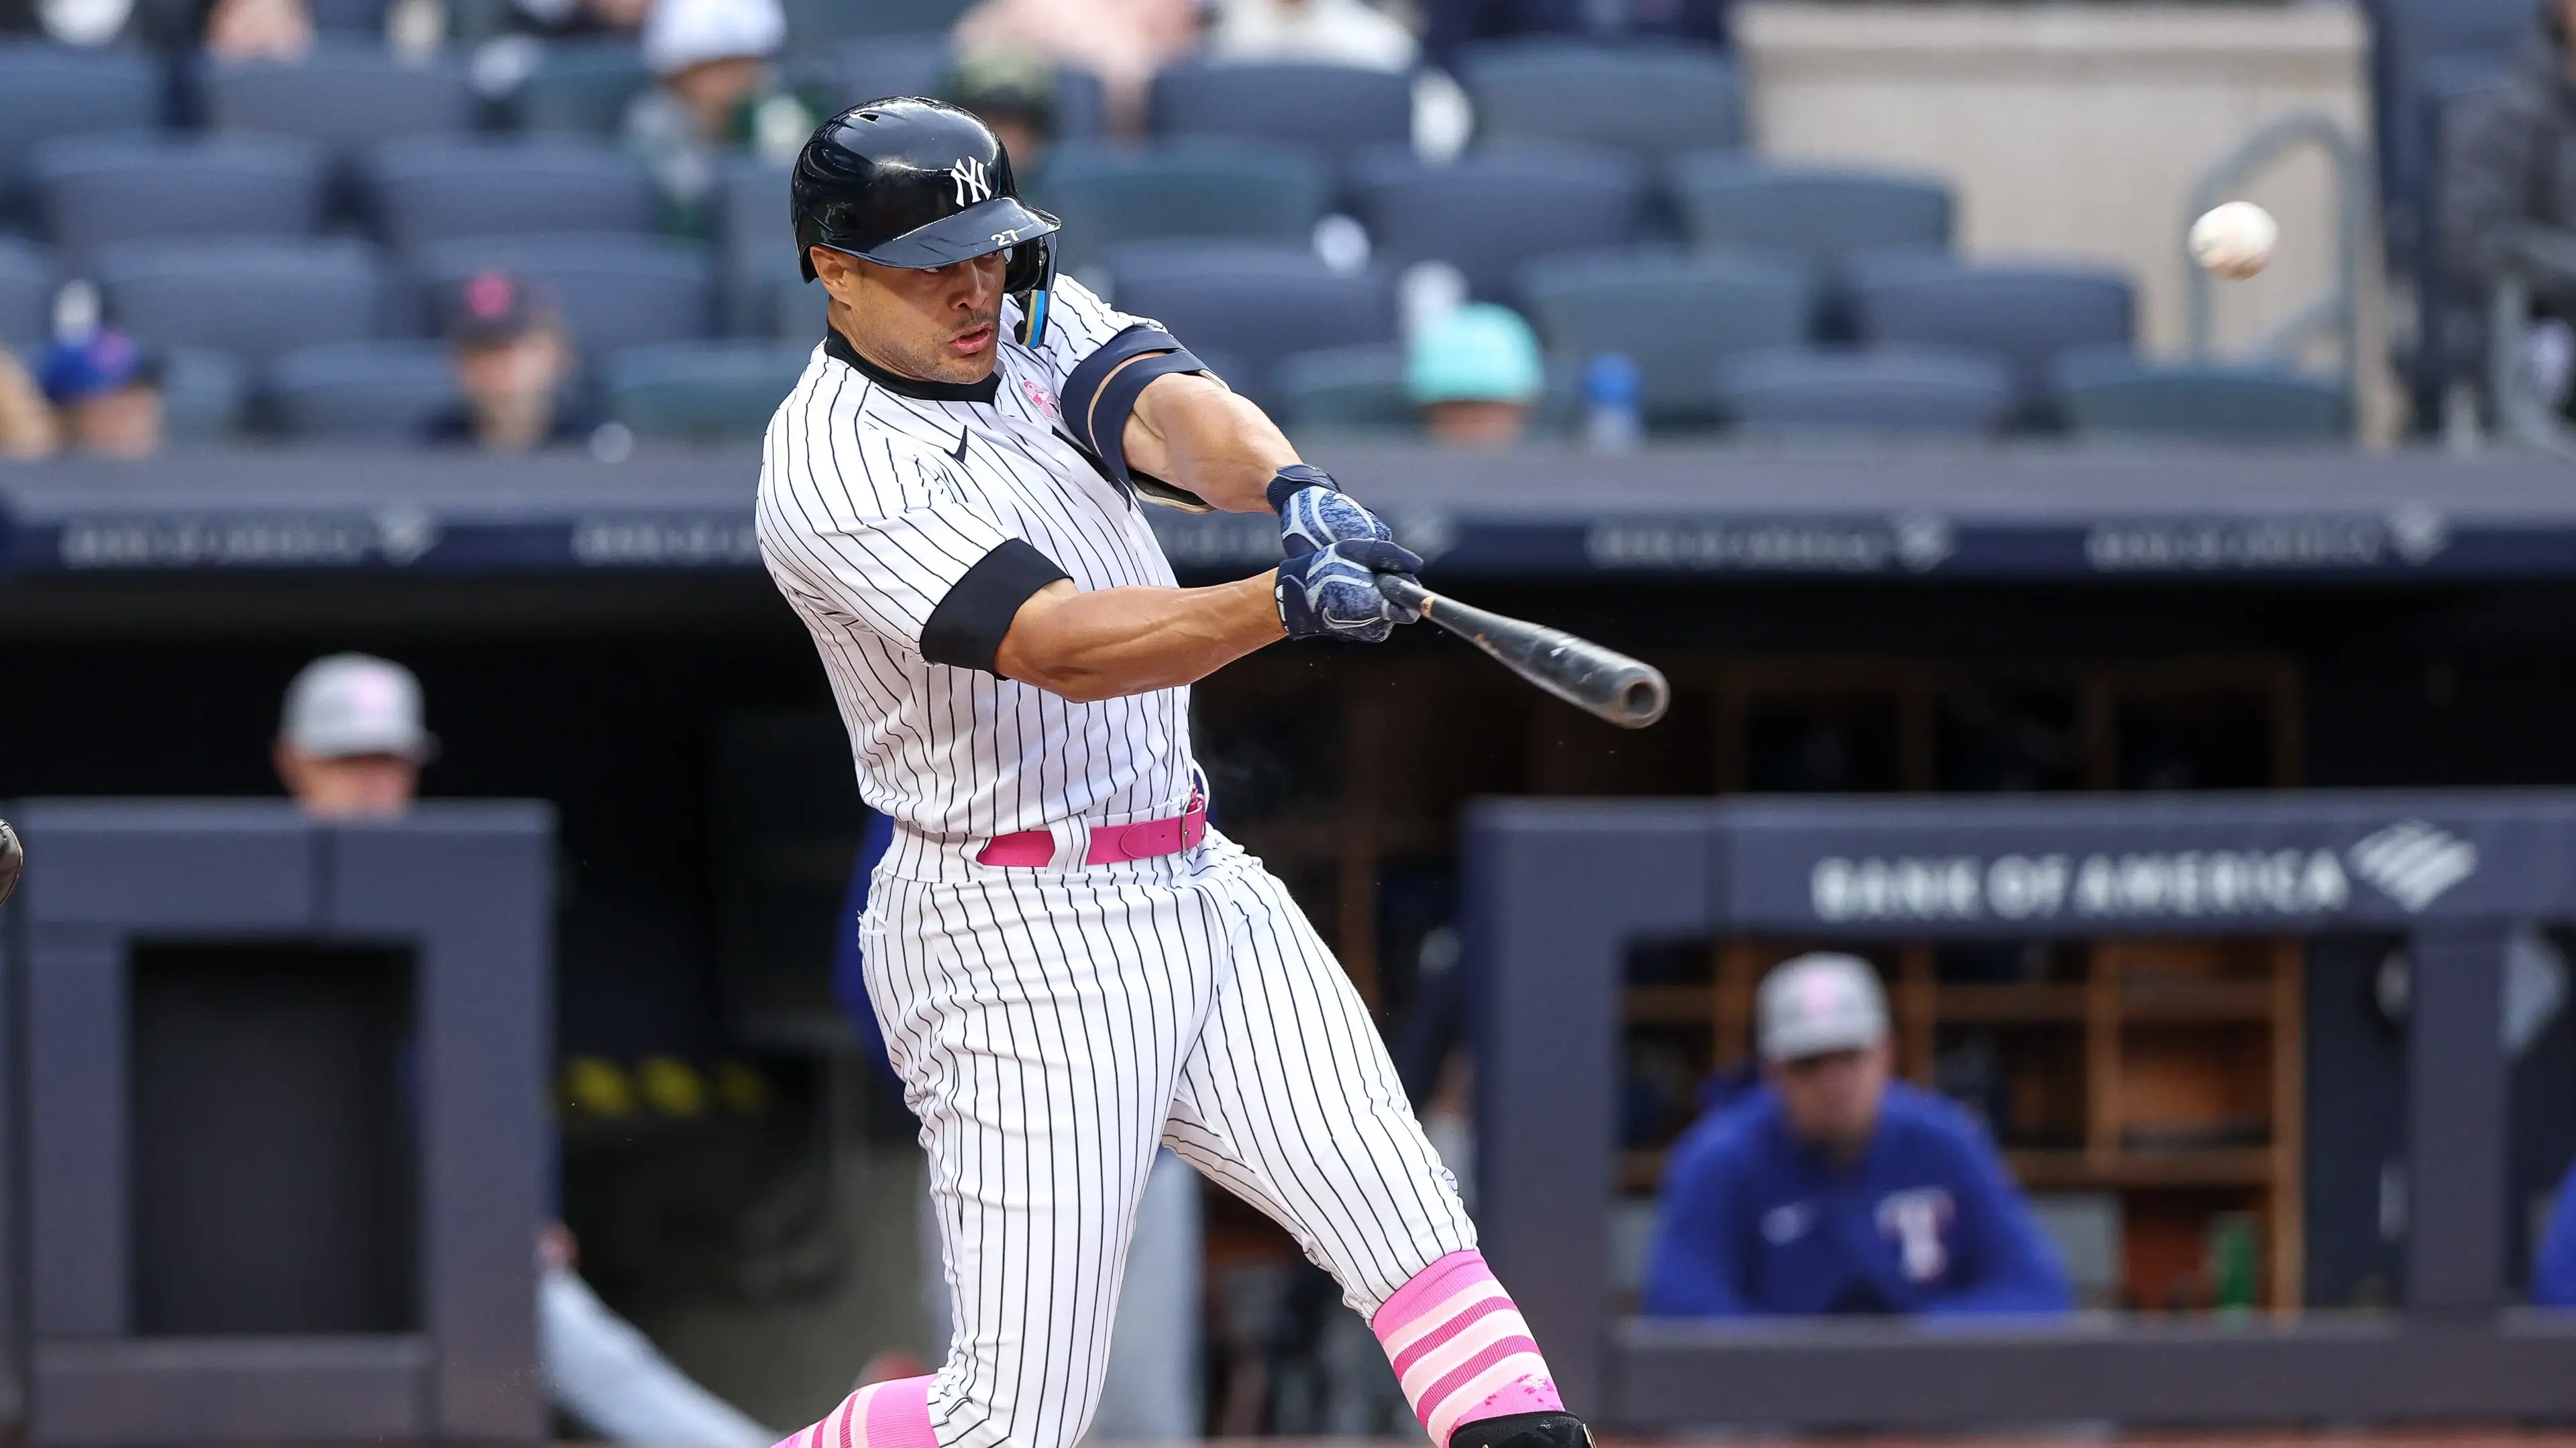 May 8, 2022; Bronx, New York, USA; New York Yankees designated hitter Giancarlo Stanton (27) hits a two run home run during the third inning against the Texas Rangers at Yankee Stadium. / Vincent Carchietta-USA TODAY Sports